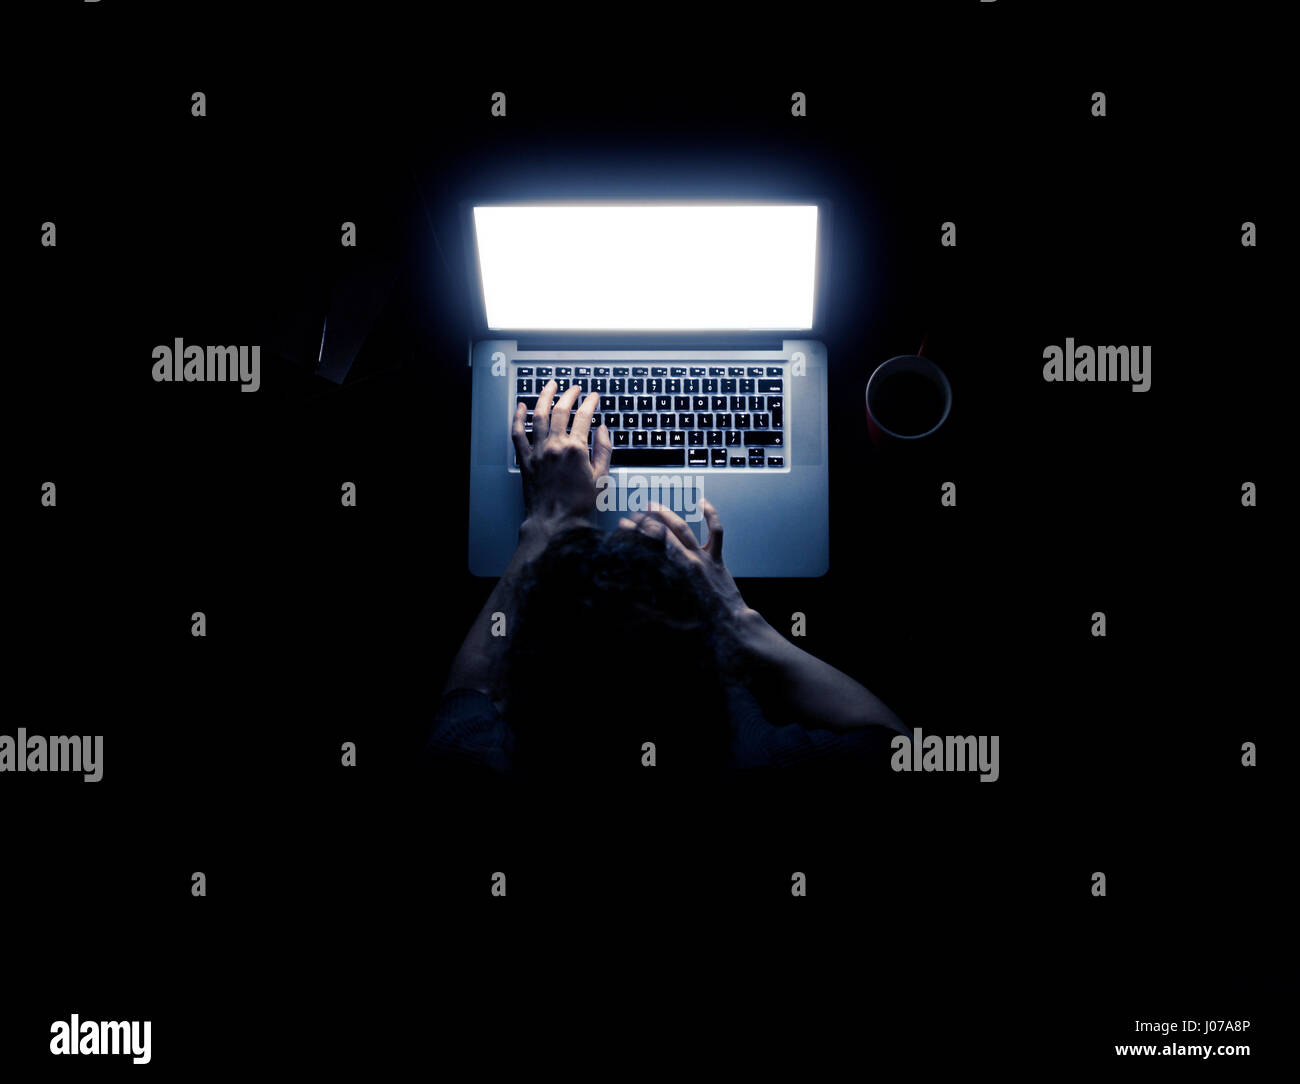 Woman using a laptop computer in darkness with her hands illuminated by the computer screen isolated on black background Stock Photo